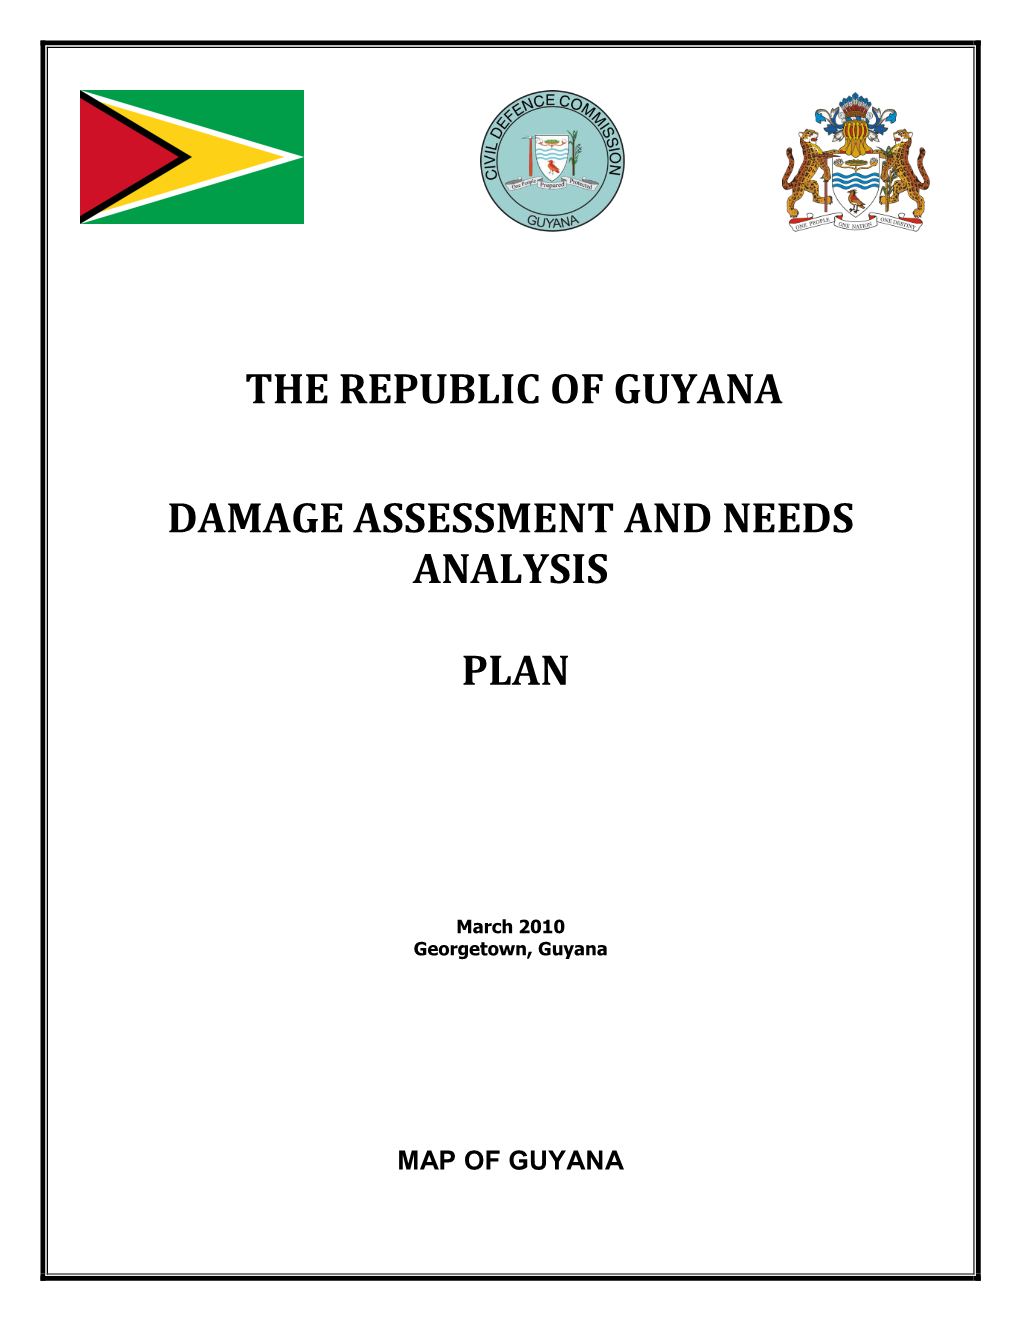 The Republic of Guyana Damage Assessment And